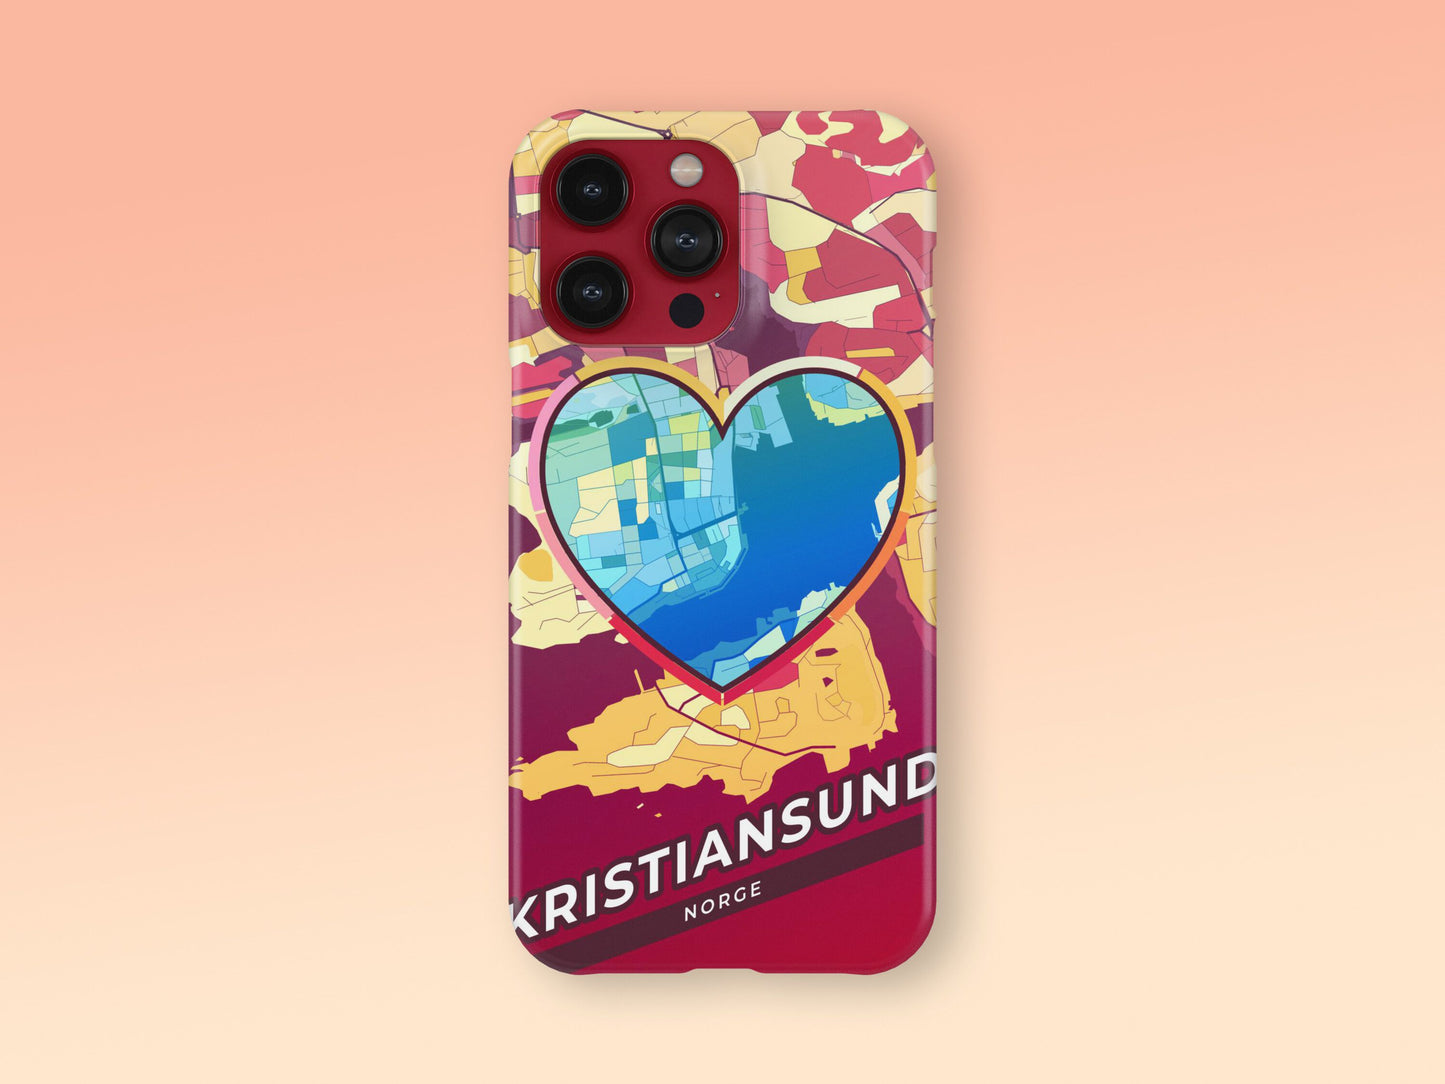 Kristiansund Norway slim phone case with colorful icon. Birthday, wedding or housewarming gift. Couple match cases. 2